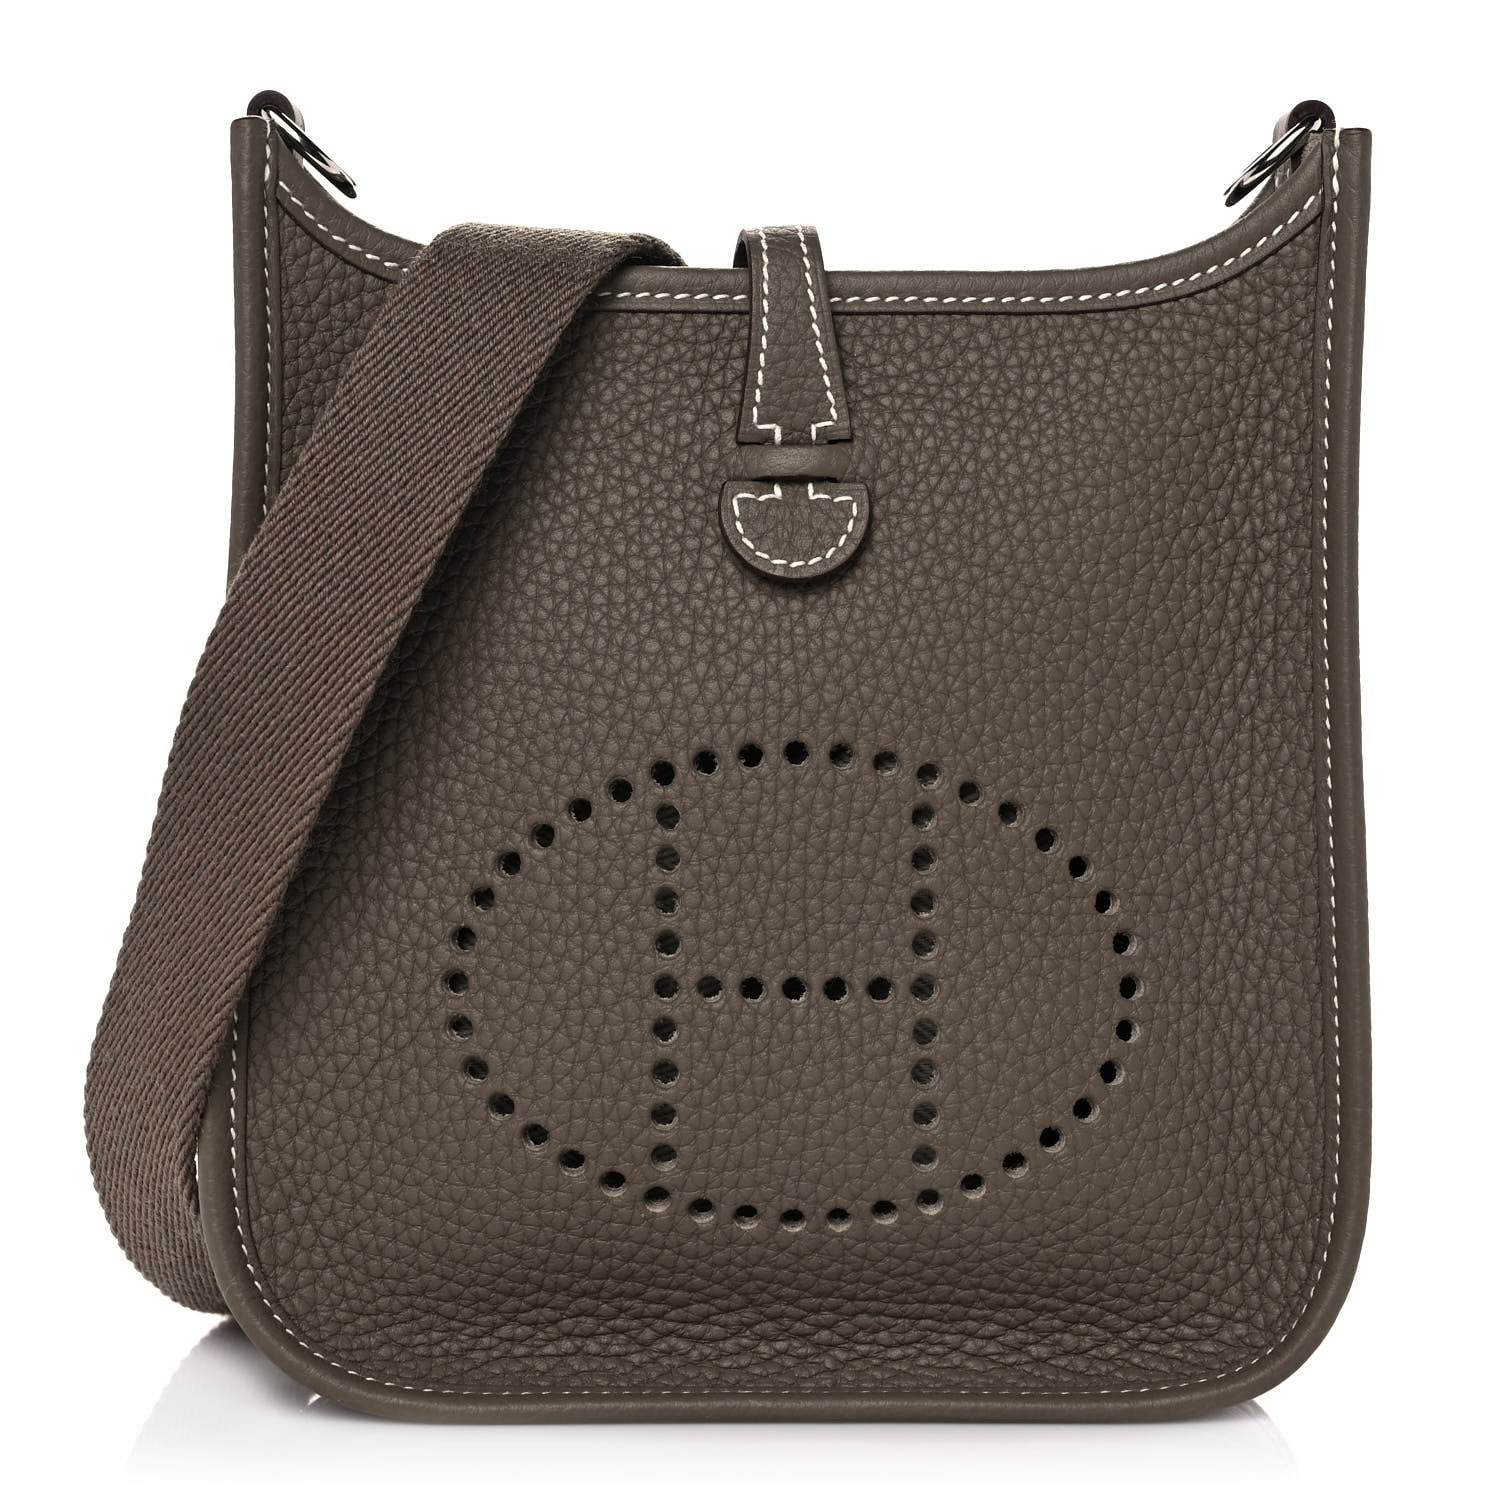 Hermes 29cm Bi-Color Etain/Etoupe Swift Perforated Leather